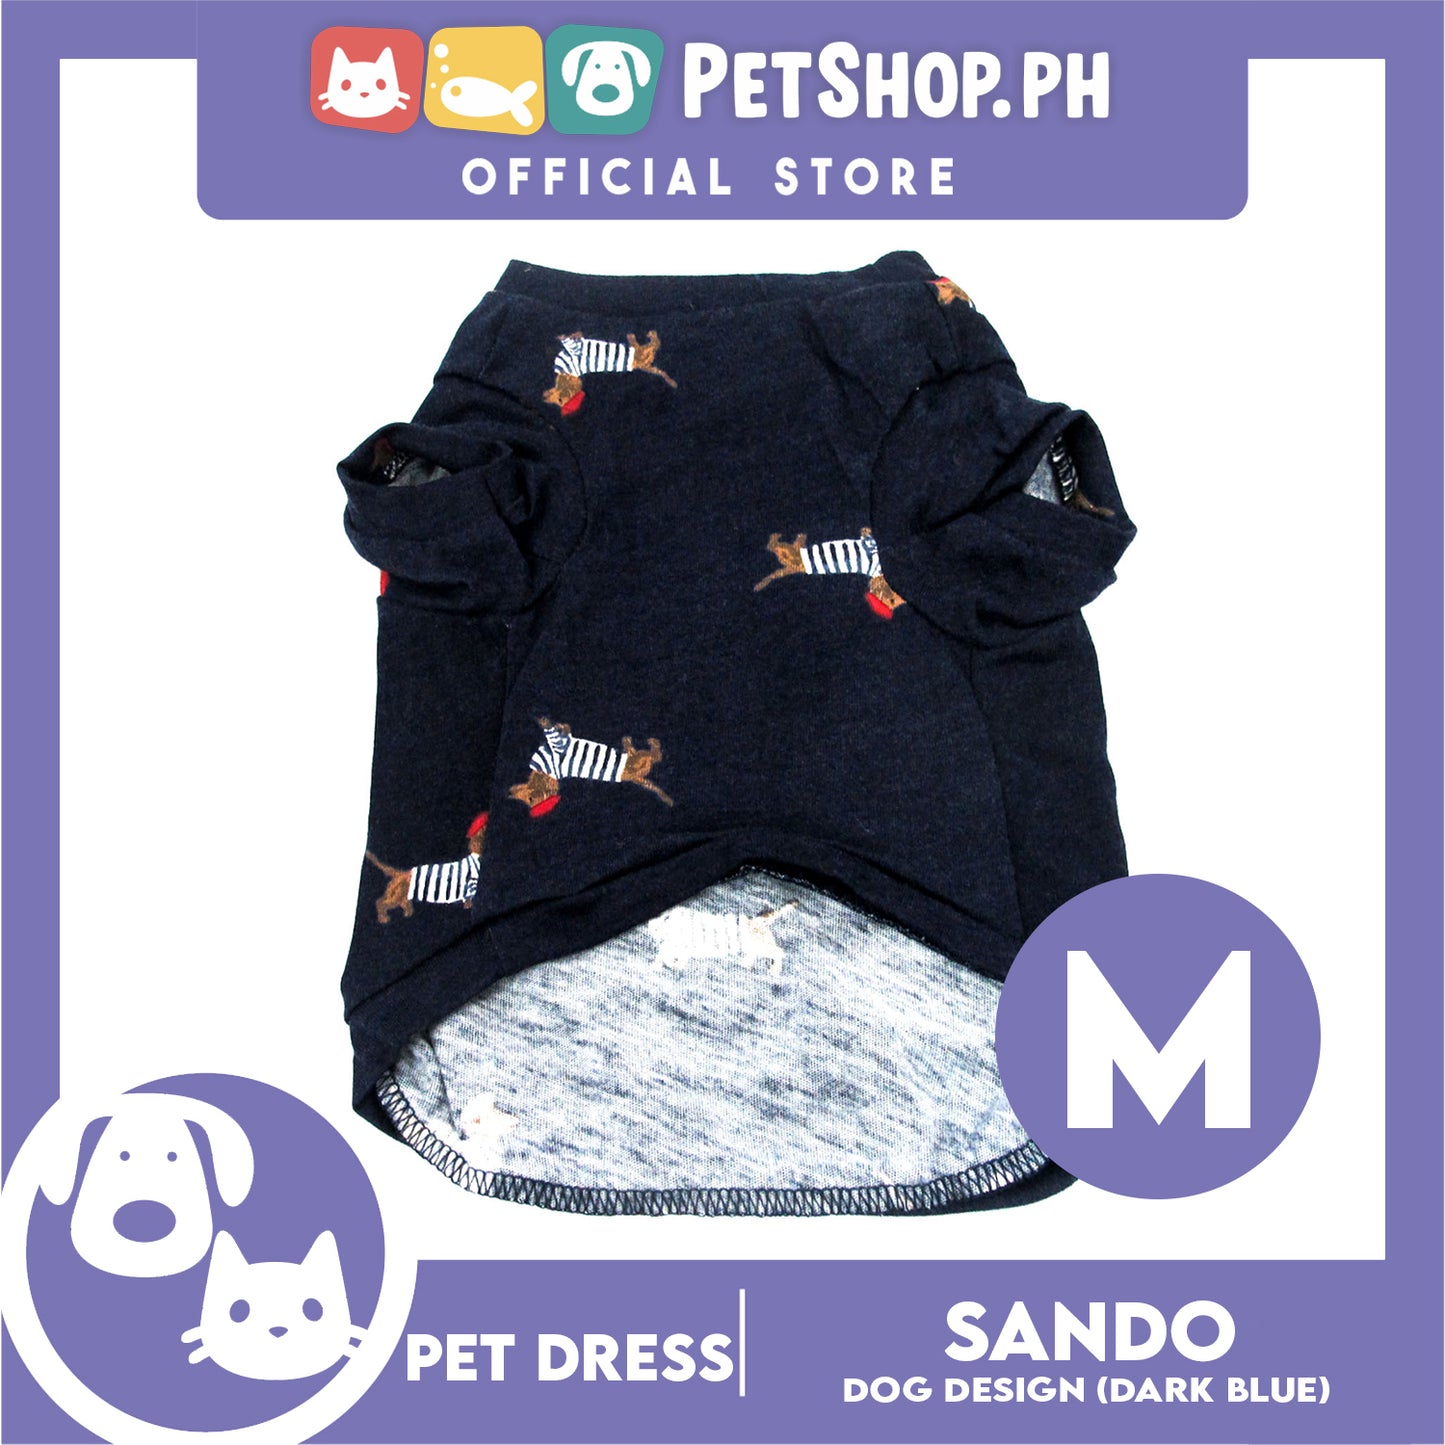 Pet T-Shirt Cute Daschund (Medium) with Hat Print for Puppy, Small Dog-Breathable Clothes Sweatshirt